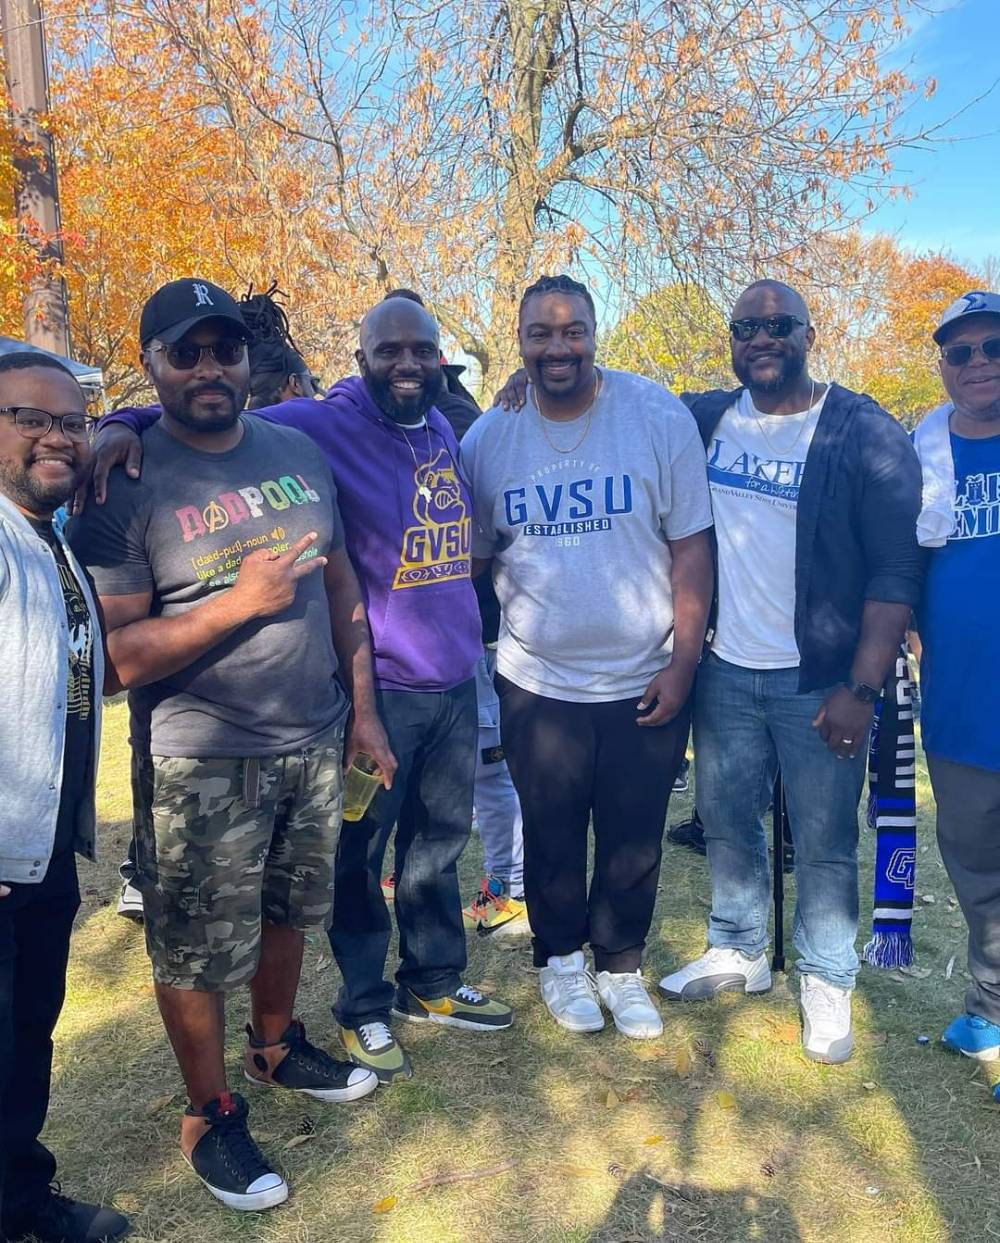 A group of alumni pose for a photo at the tailgate in GVSU gear.